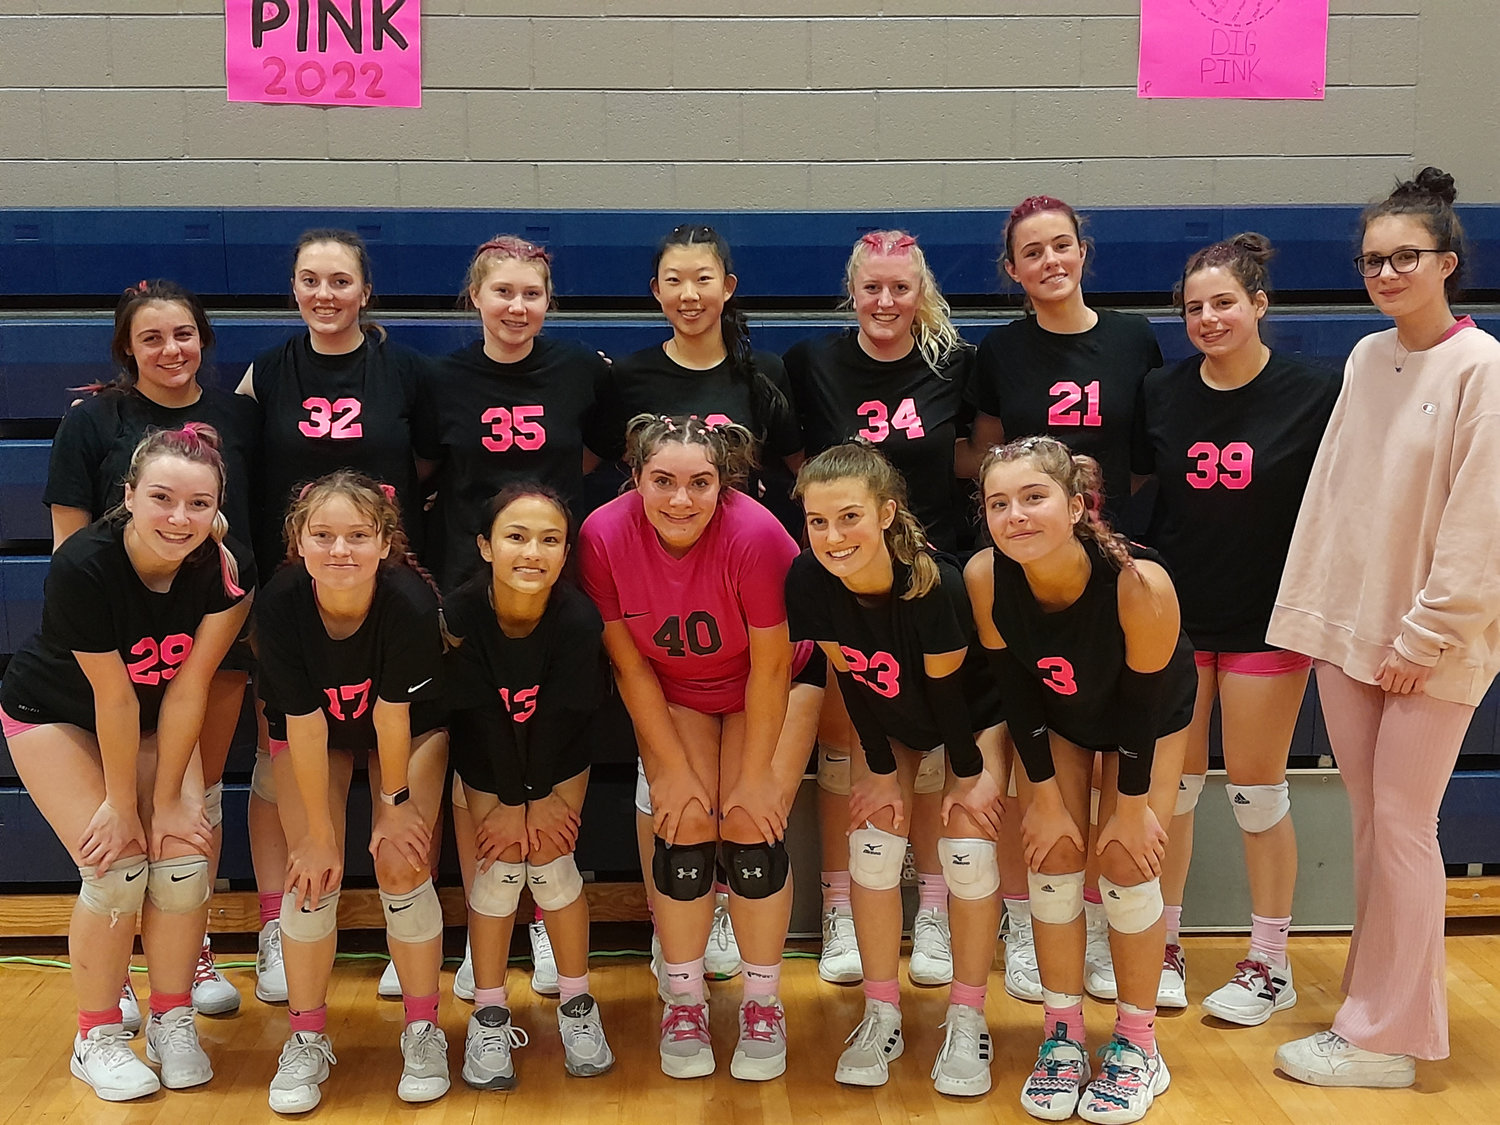 The Central Bucks West girls volleyball team triumphed in last Thursday’s Dig Pink Game against rival CB East.